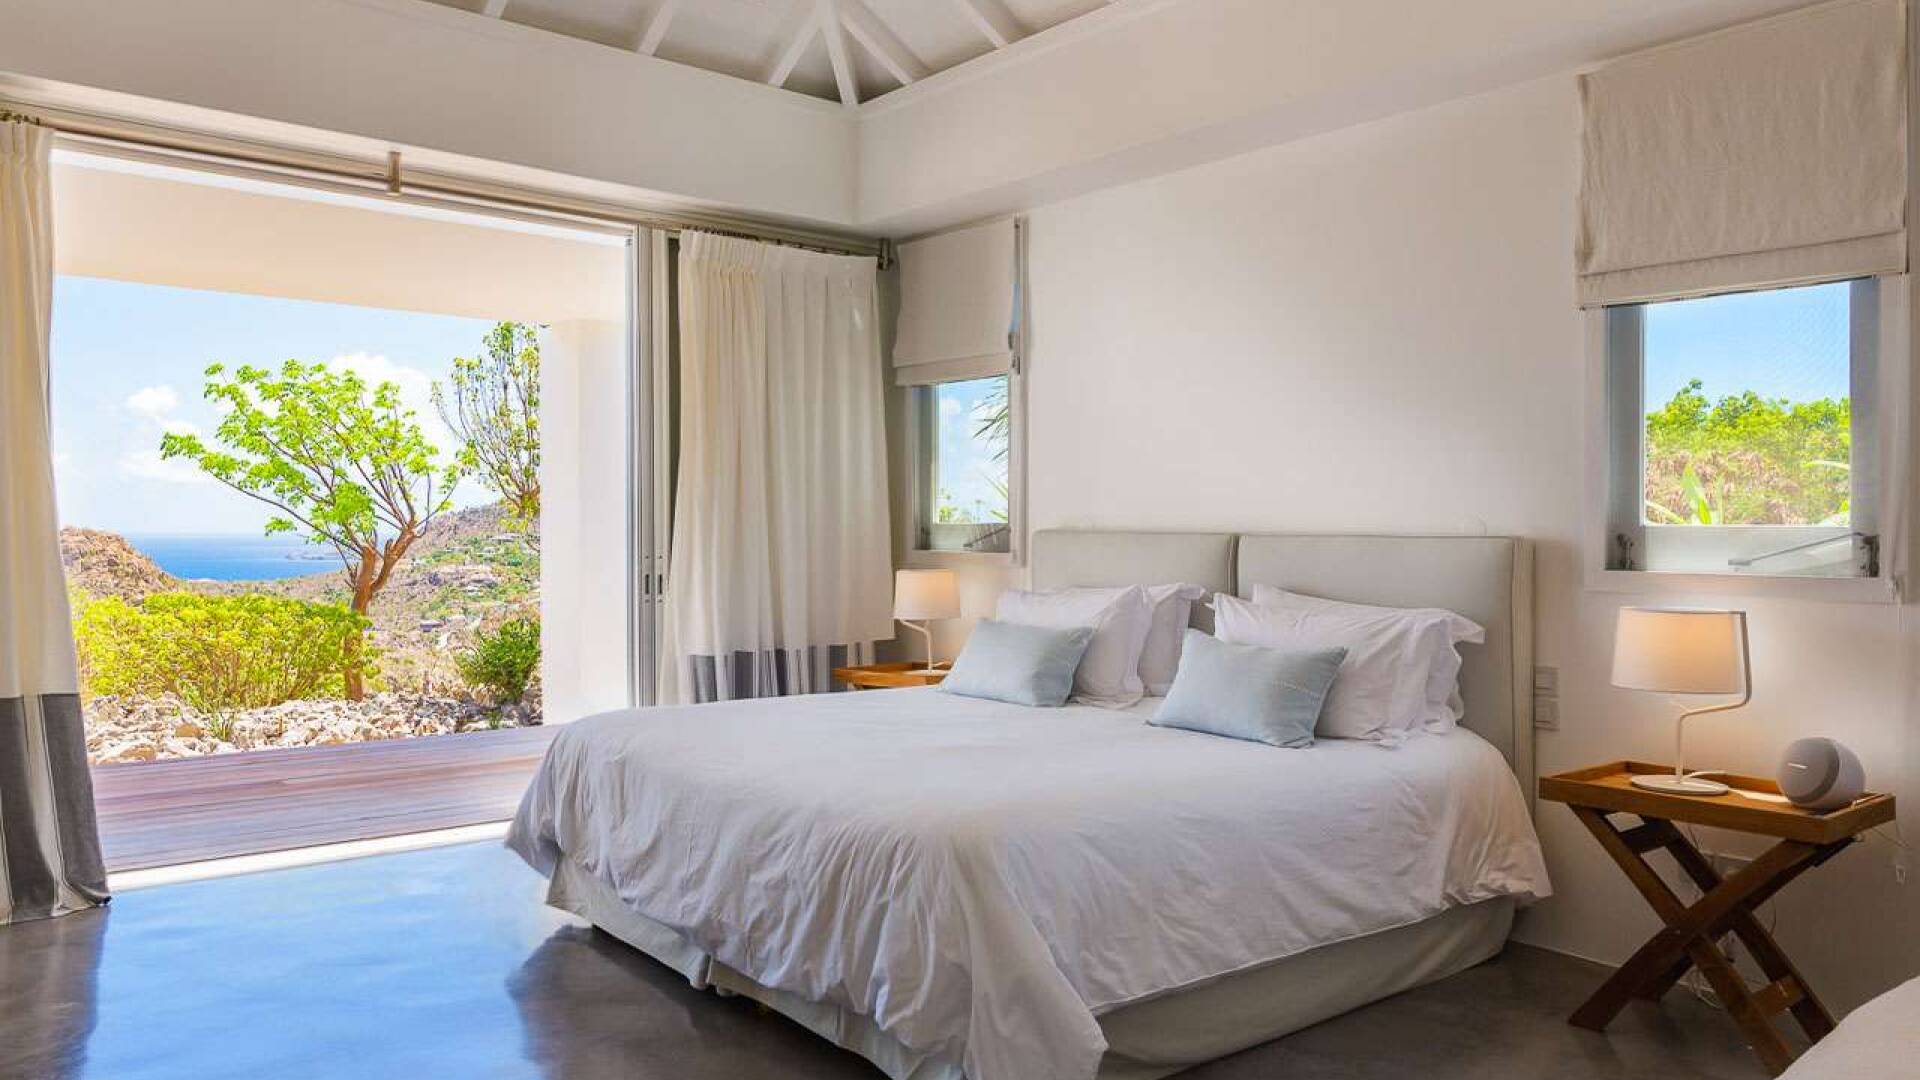 Bedroom at WV ECO, Gouverneur, St. Barthelemy